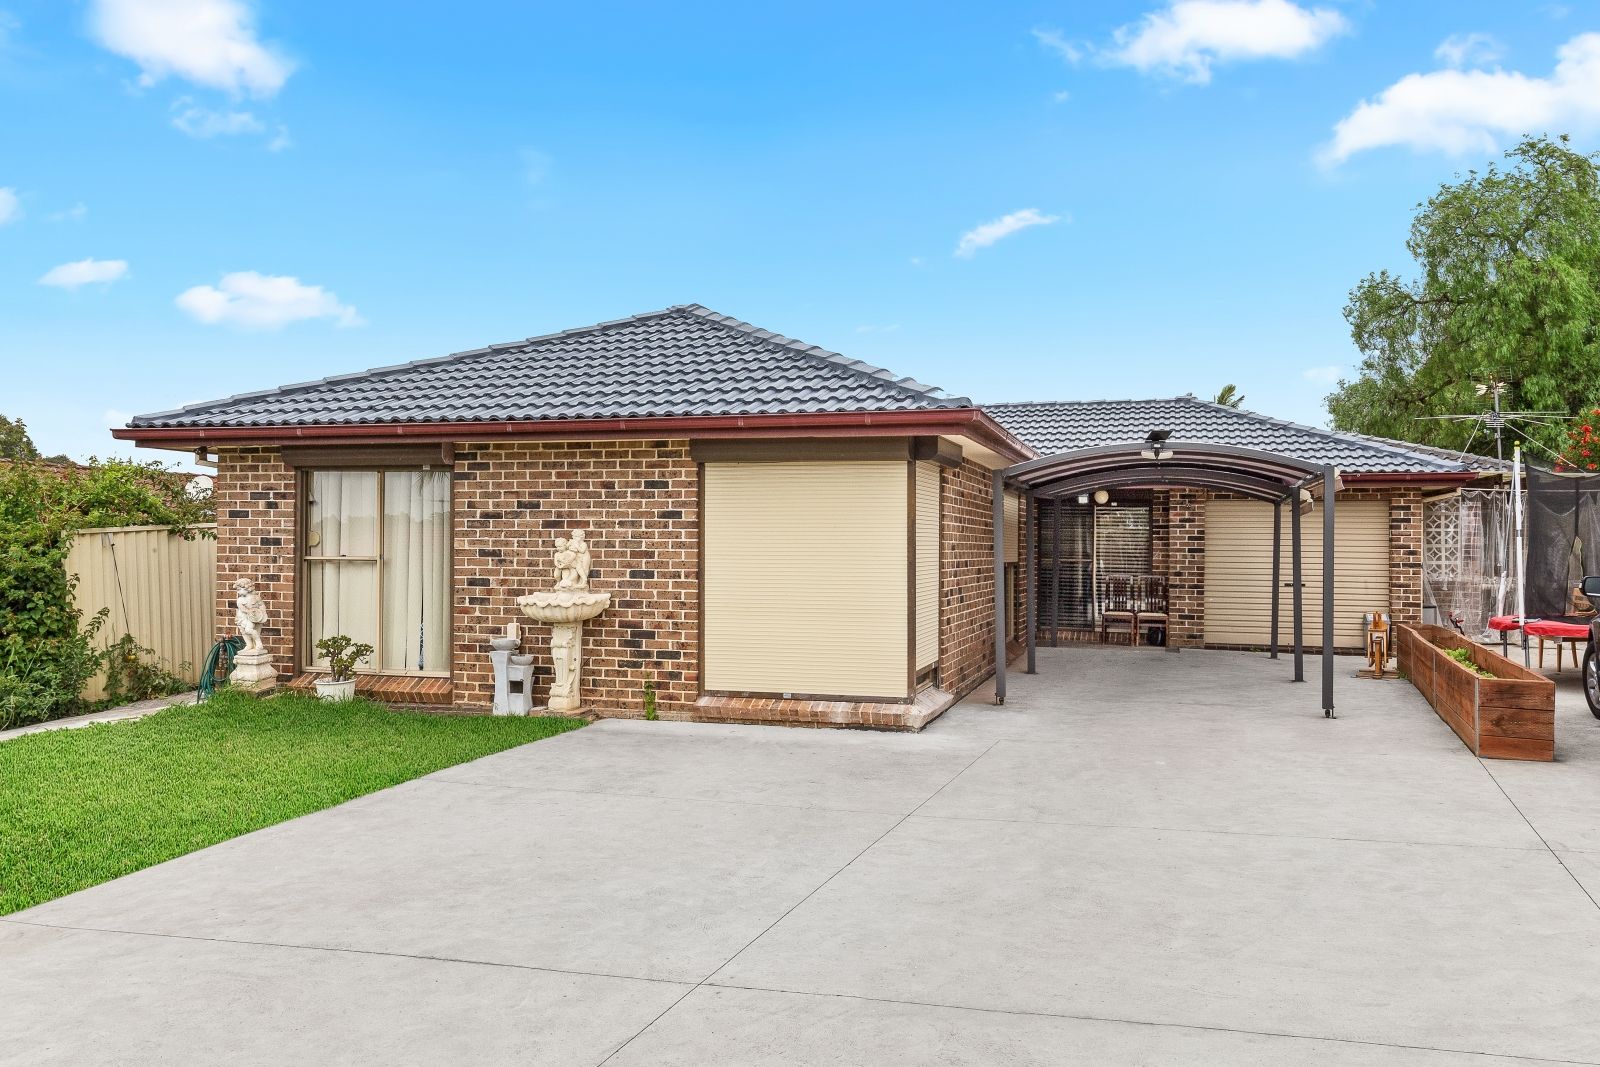 4 bedrooms House in 5 Homestead Road BONNYRIGG HEIGHTS NSW, 2177